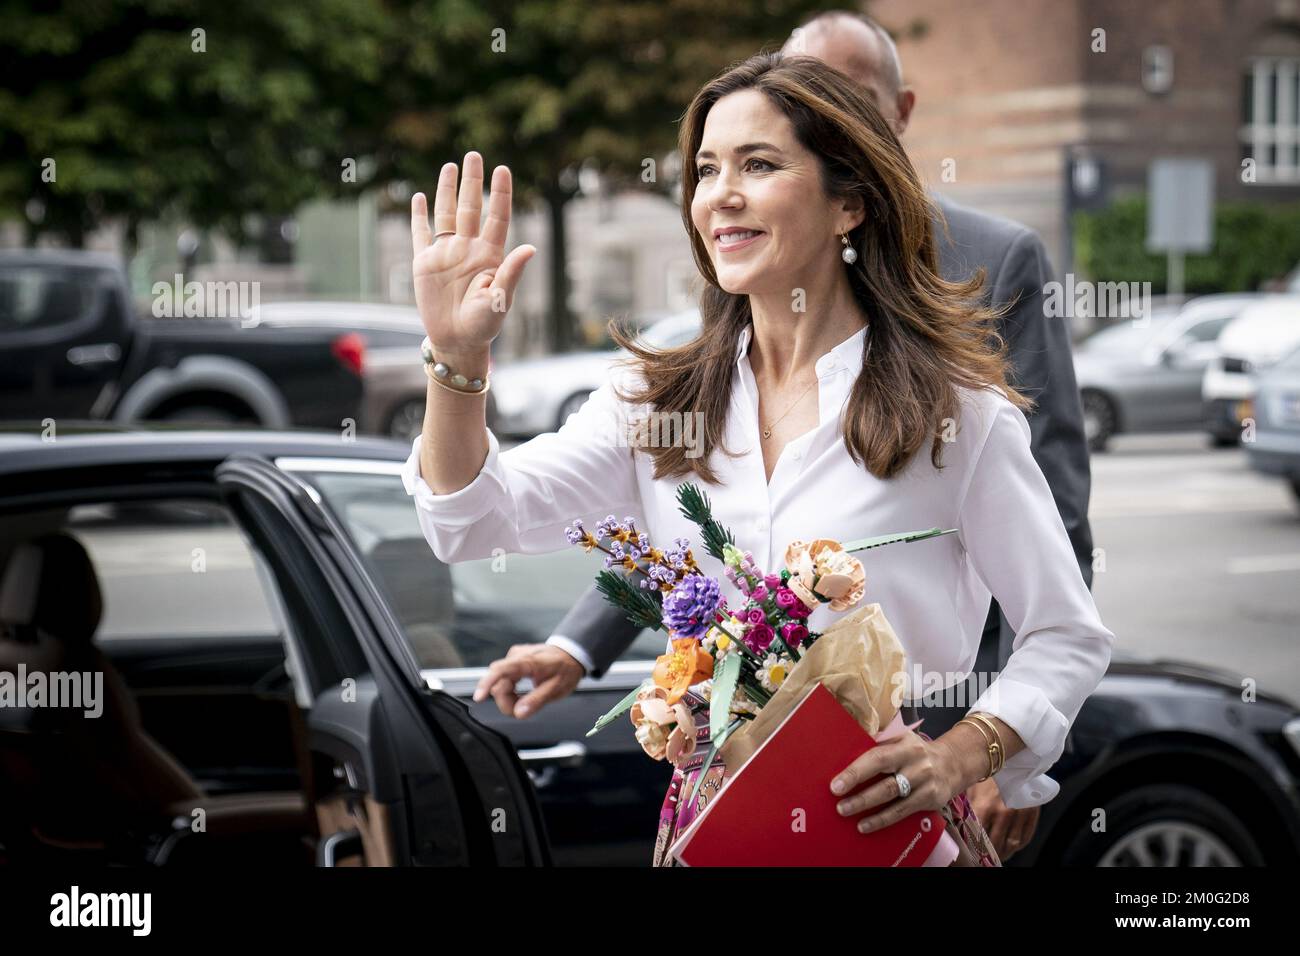 Crown Princess Mary received a bouquet made of LEGO in when she attended Creative Denmark's launch event 'Creative Summit' at Industriens Hus in Copenhagen. Wednesday, June 23, 2021. Dansk Industri (The Confederation of Danish Industry) and Creative Denmark want to create a platform that focuses on the growth potential in the creative industries, while at the same time facilitating knowledge and networking opportunities where creative actors can be inspired by each other's business areas and models. With her participation, Crown Princess Mary helped focus attention on talented Danish creative Stock Photo